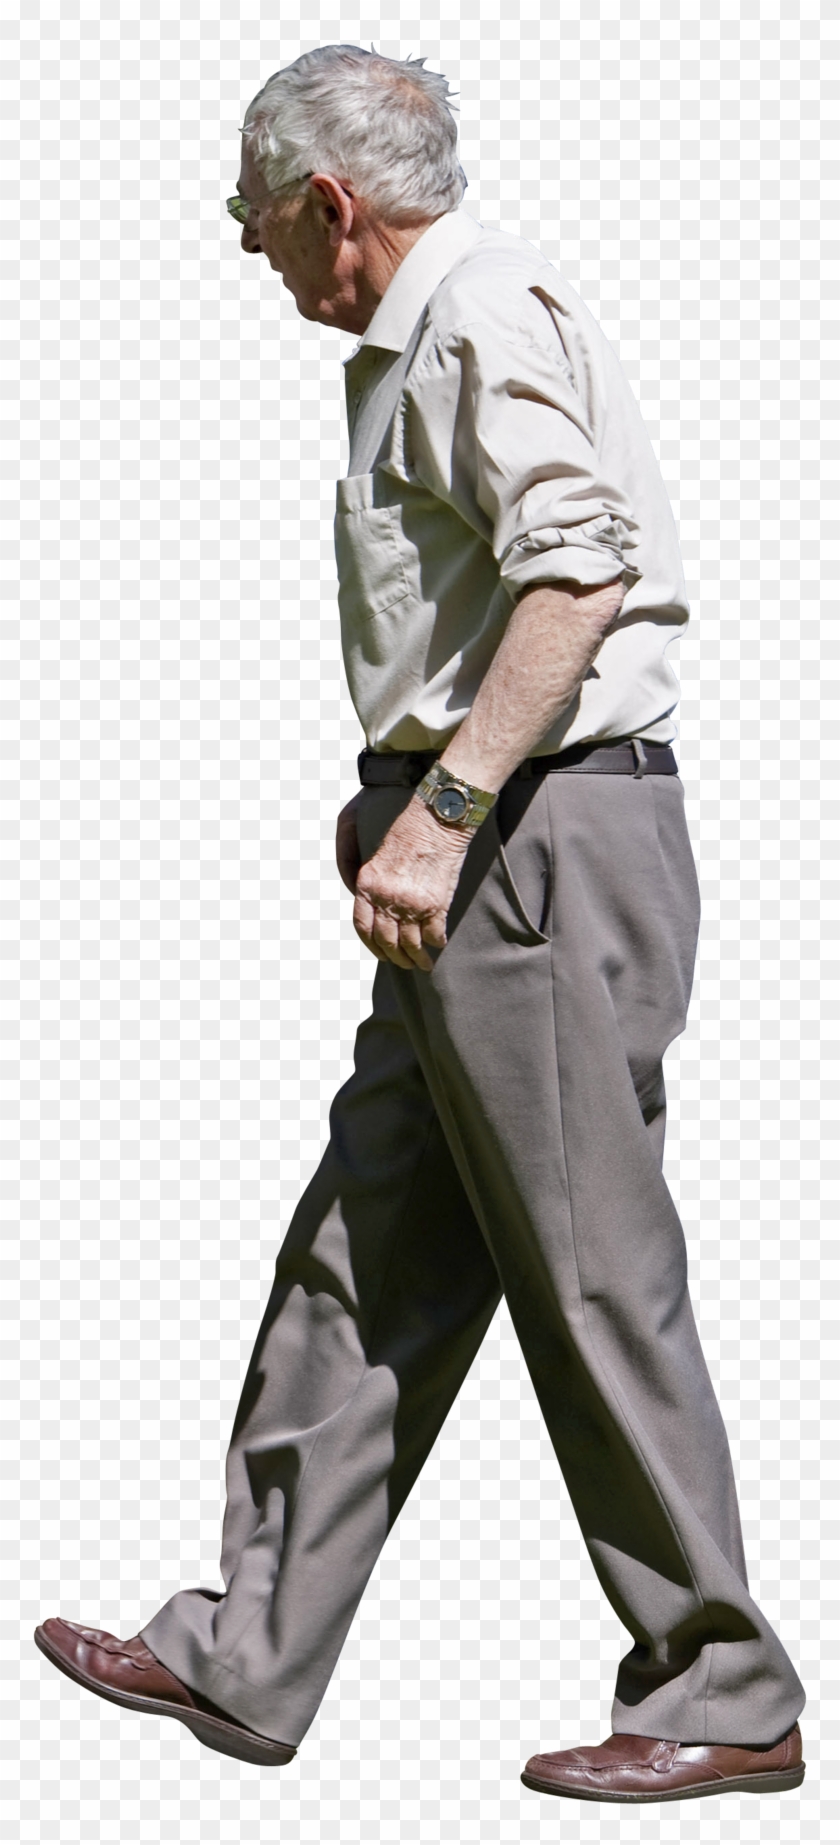 Elderly Couple Holding Hands Walking Garry Knight/cc - Old People Png Walking Clipart #5837524